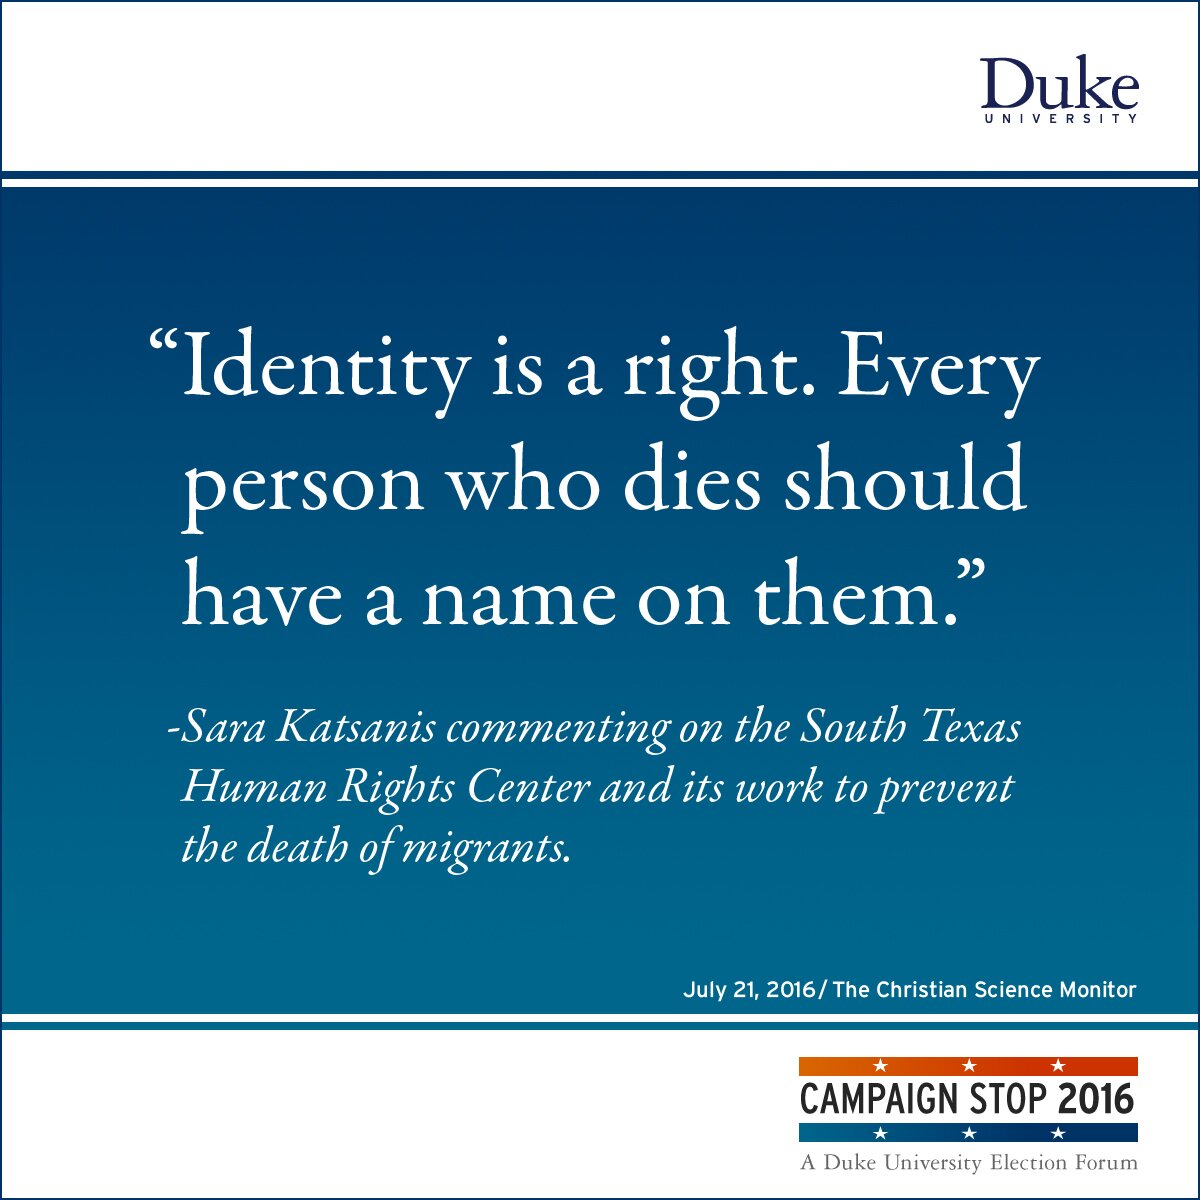 “Identity is a right. Every person who dies should have a name on them.” -Sara Katsanis commenting on the South Texas Human Rights Center and its work to prevent the death of migrants.